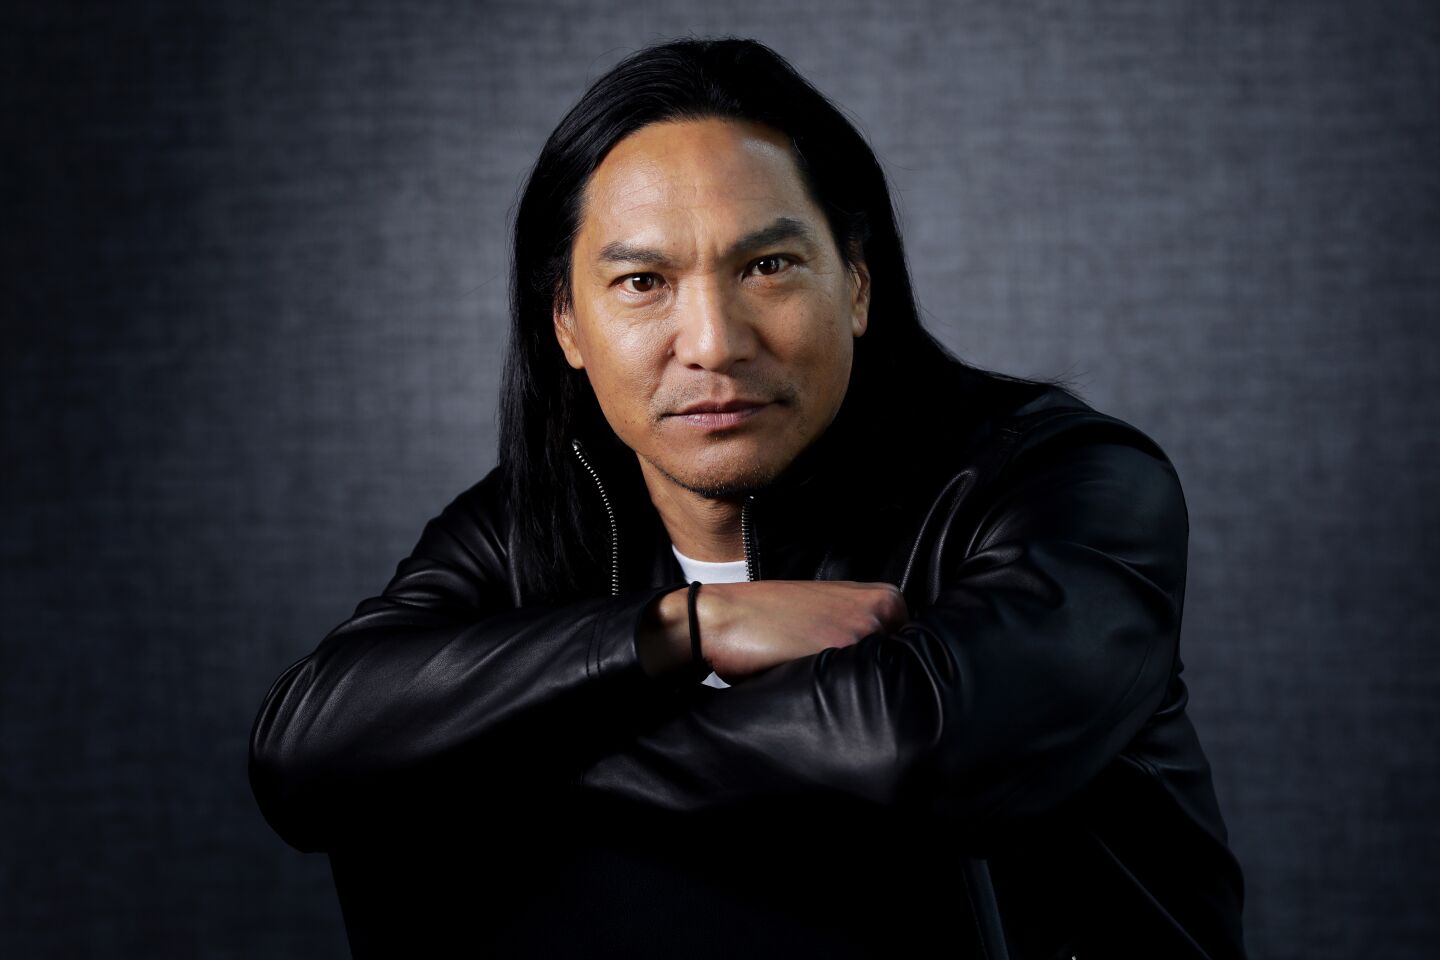 Jason Scott Lee is photographed at the InterContinental hotel in downtown Los Angeles on Sunday, March 8, 2020.